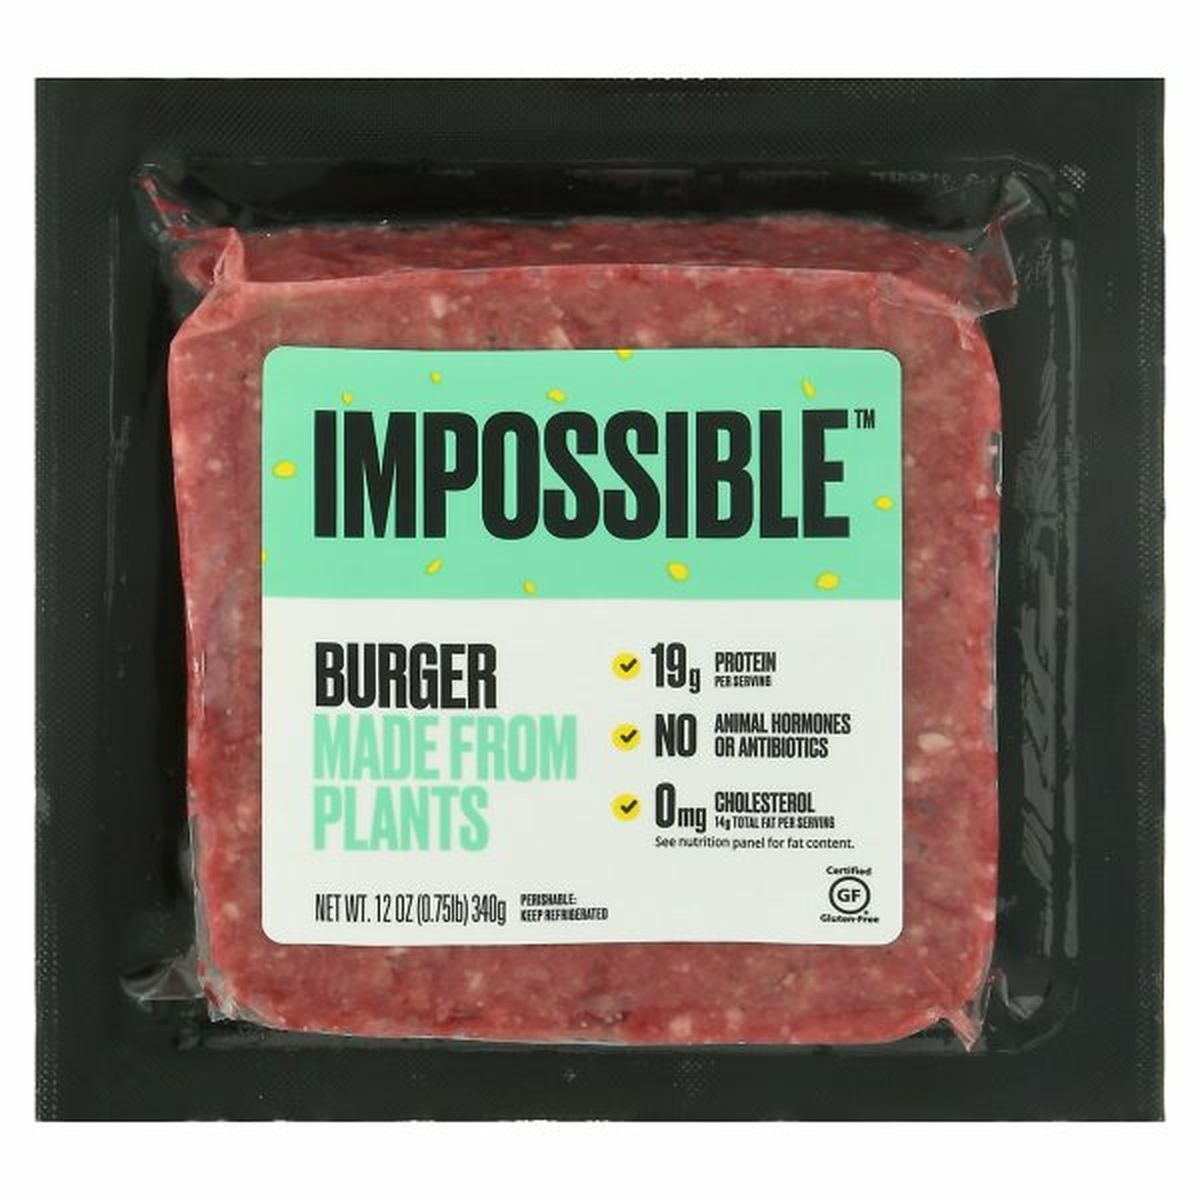 Calories in Impossible Burger, Made from Plants